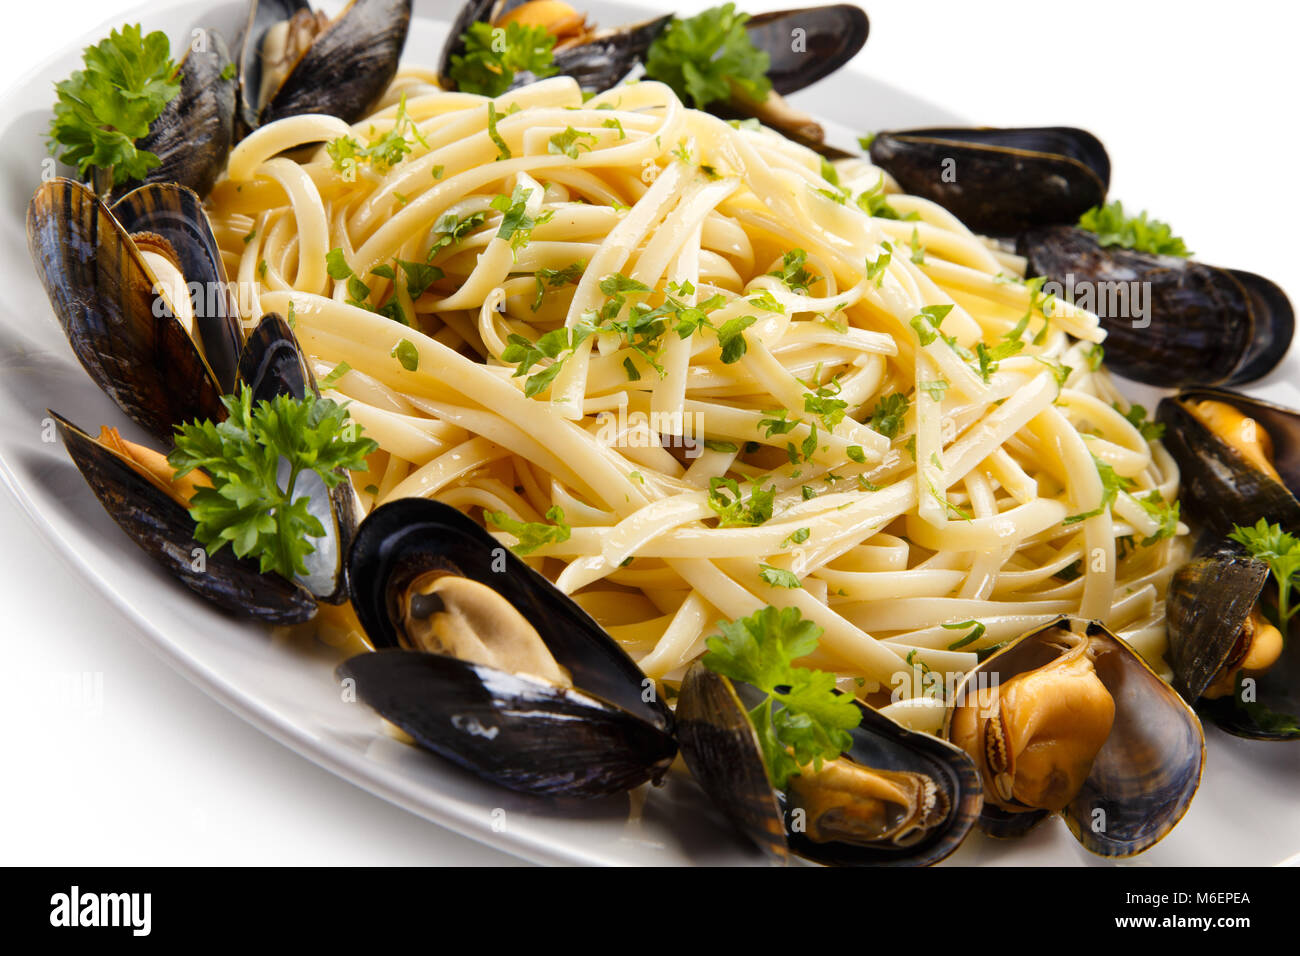 Cooked mussels and pasta on white background Stock Photo